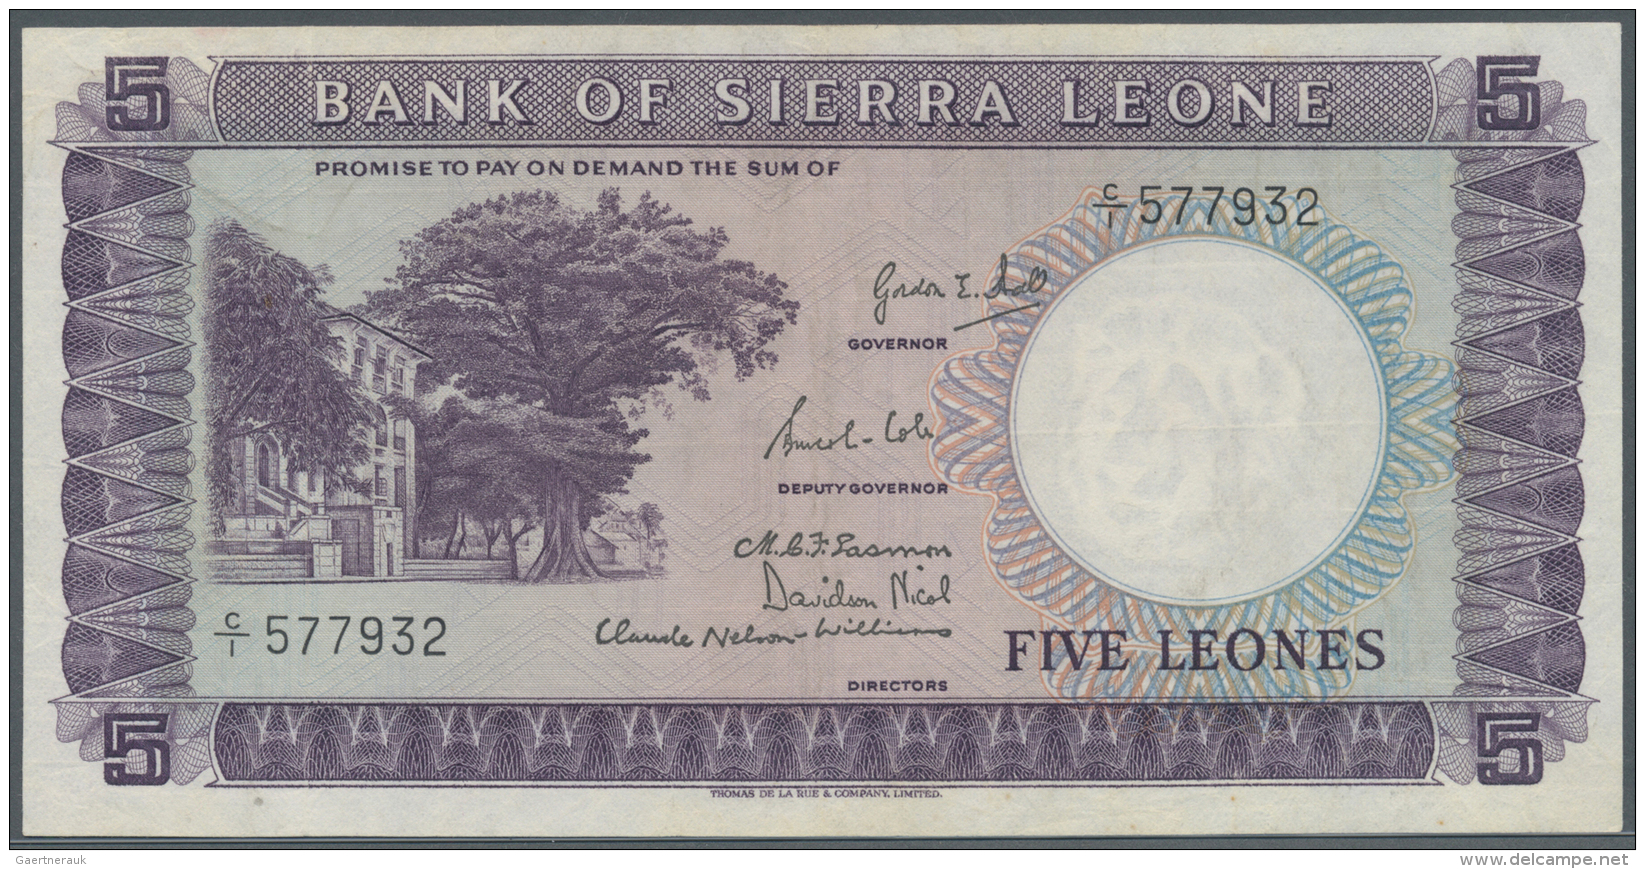 Sierra Leone: 5 Leones 1964 P. 3, Light Folds In Paper, Pressed, No Holes Or Tears, Condition: F+ To VF-. - Sierra Leone